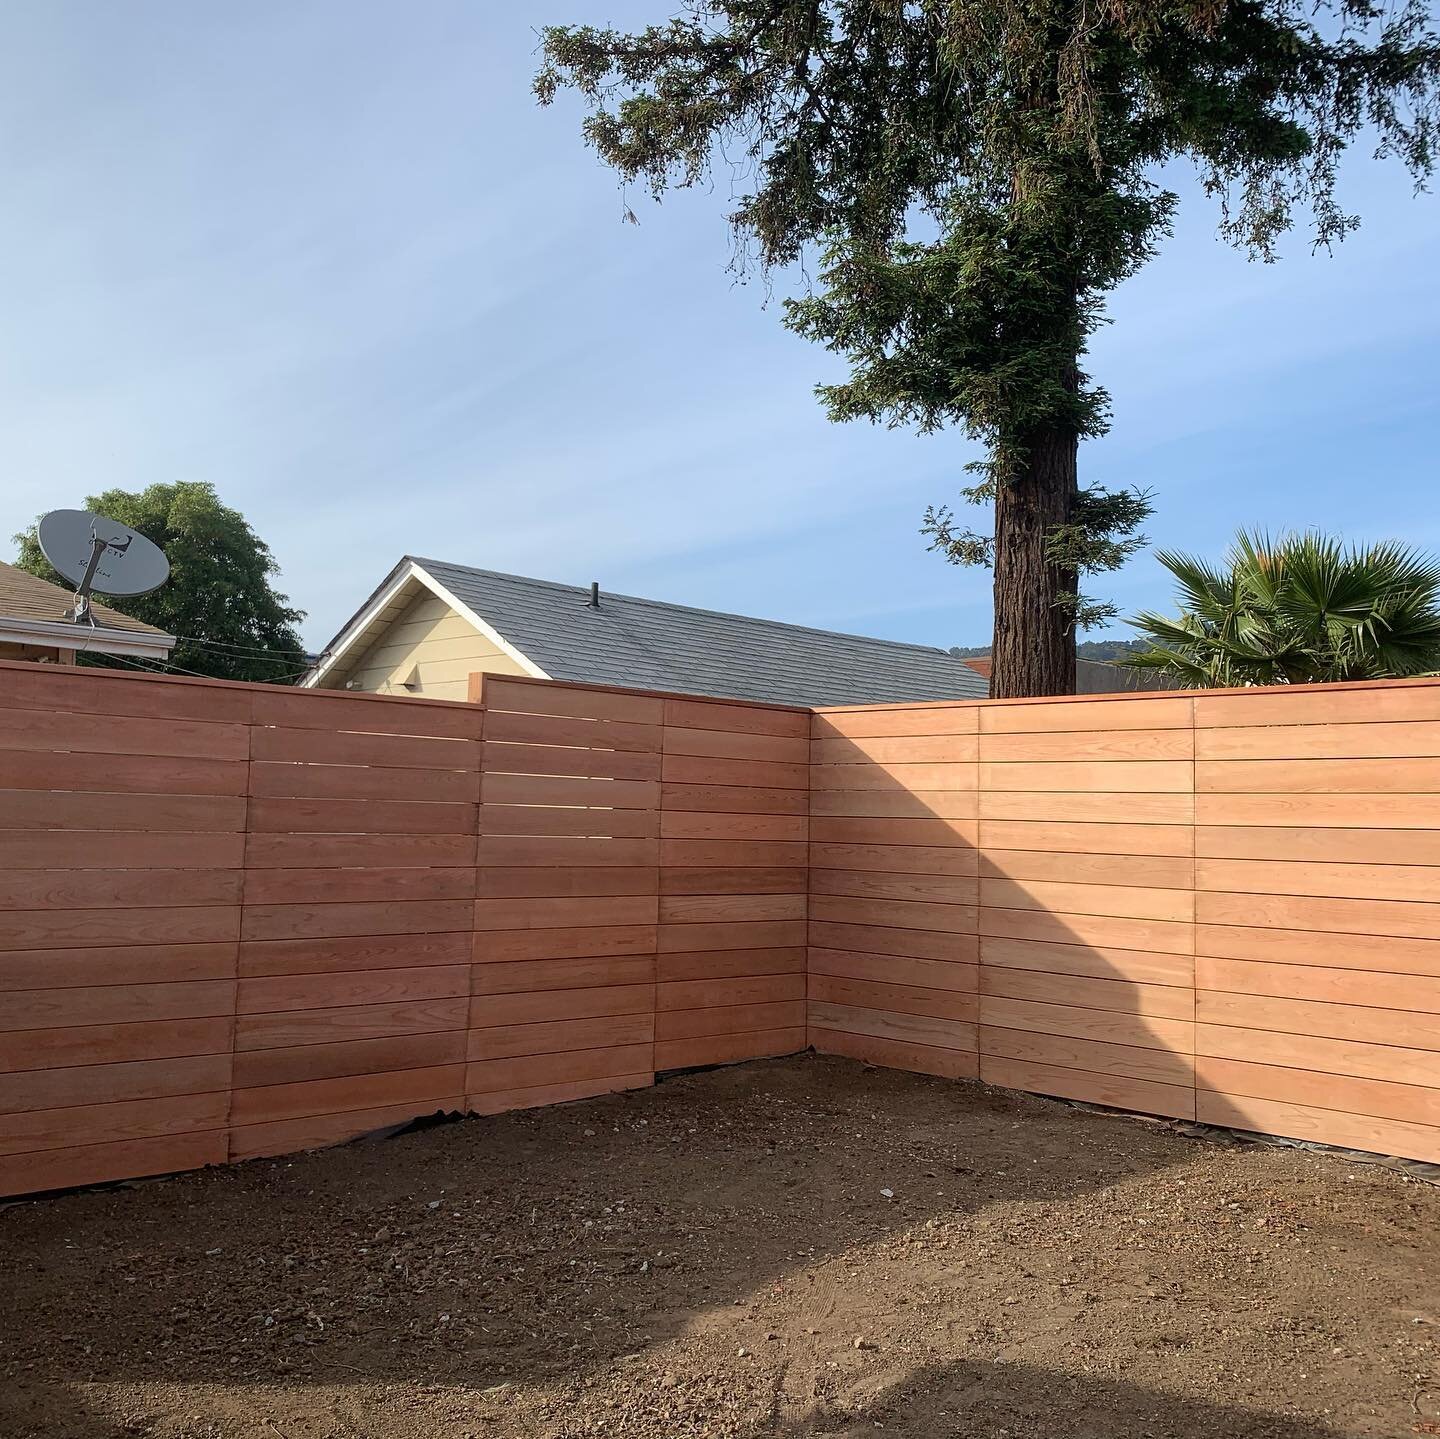 Before, during, and after:

Staying home and getting big projects done. I feel like my canvass for the backyard is ready for gardening finally after getting this redwood fence up. Gonna start drawing up some landscape ideas.